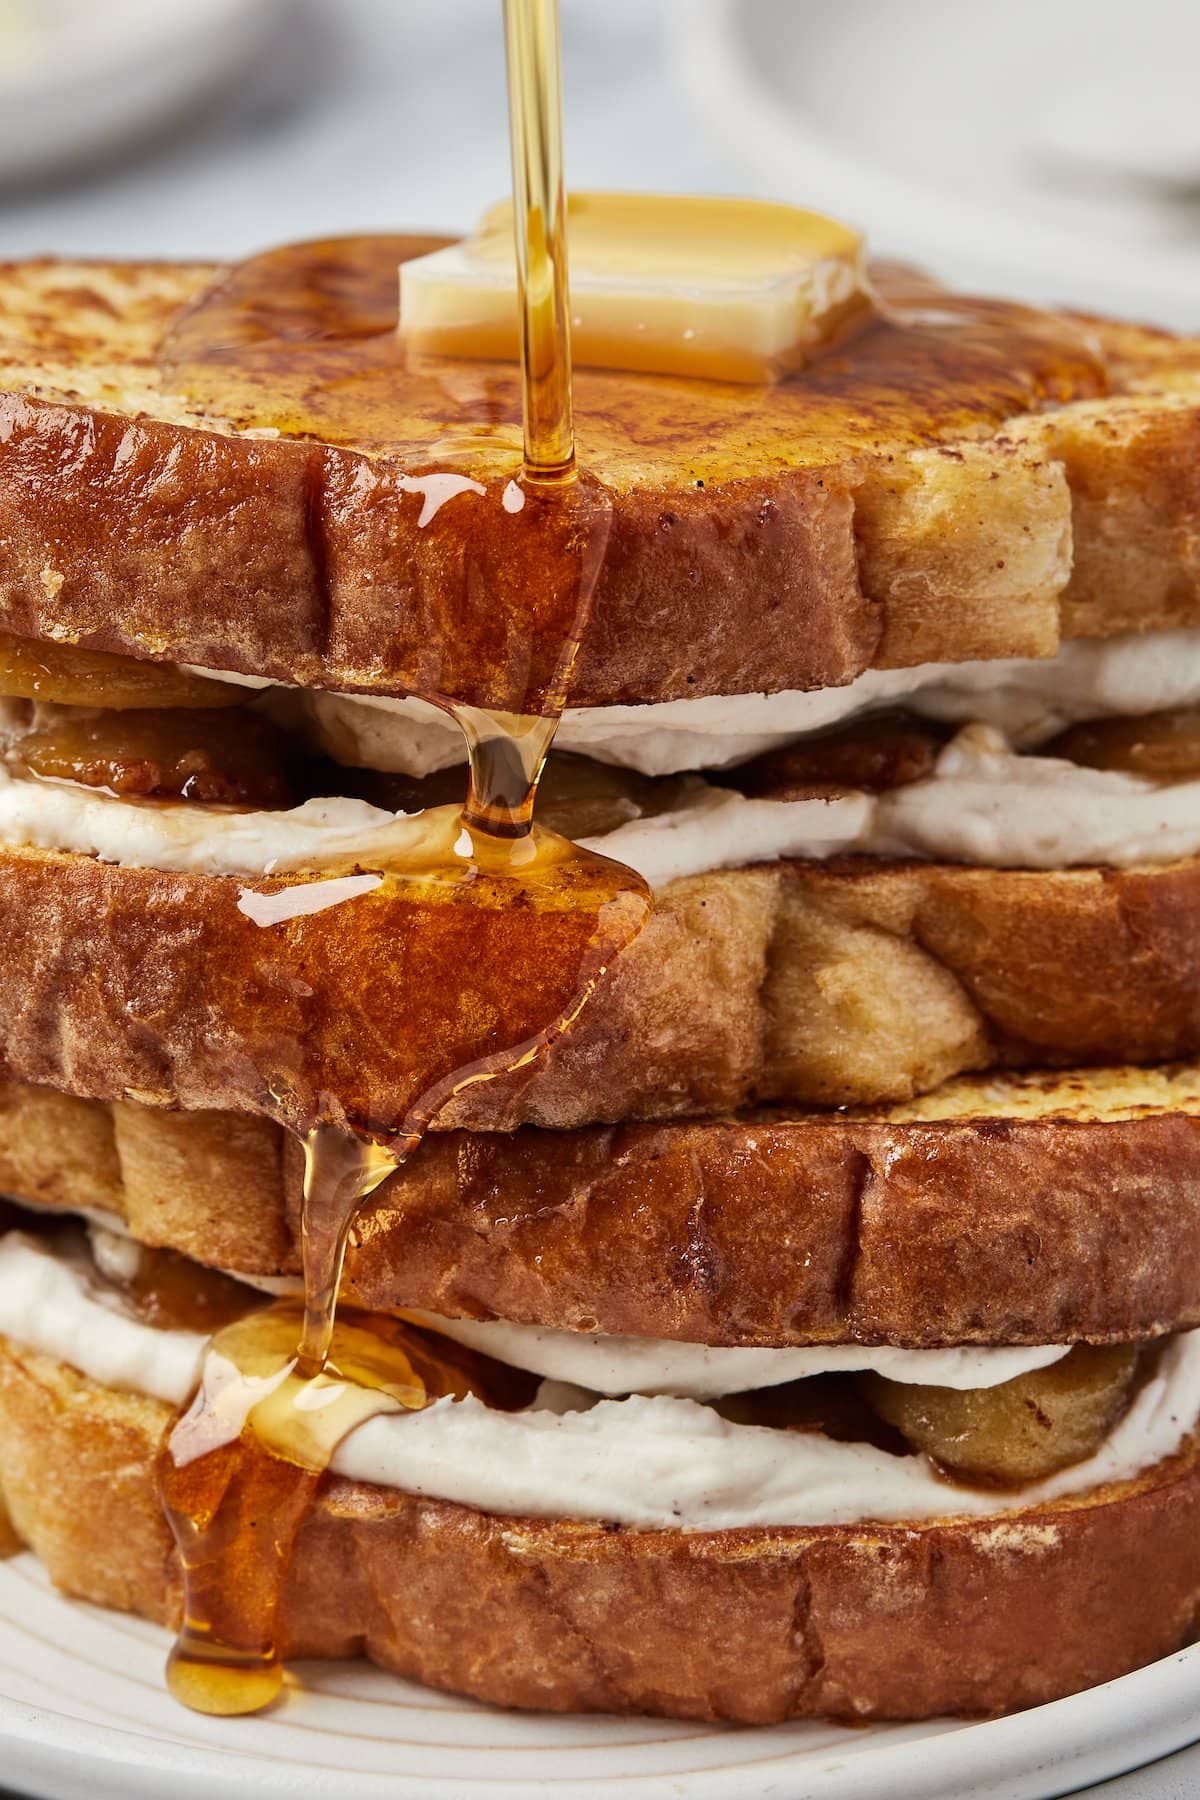 Maple syrup running down the sides of sandwiched French toast with cream cheese filling.